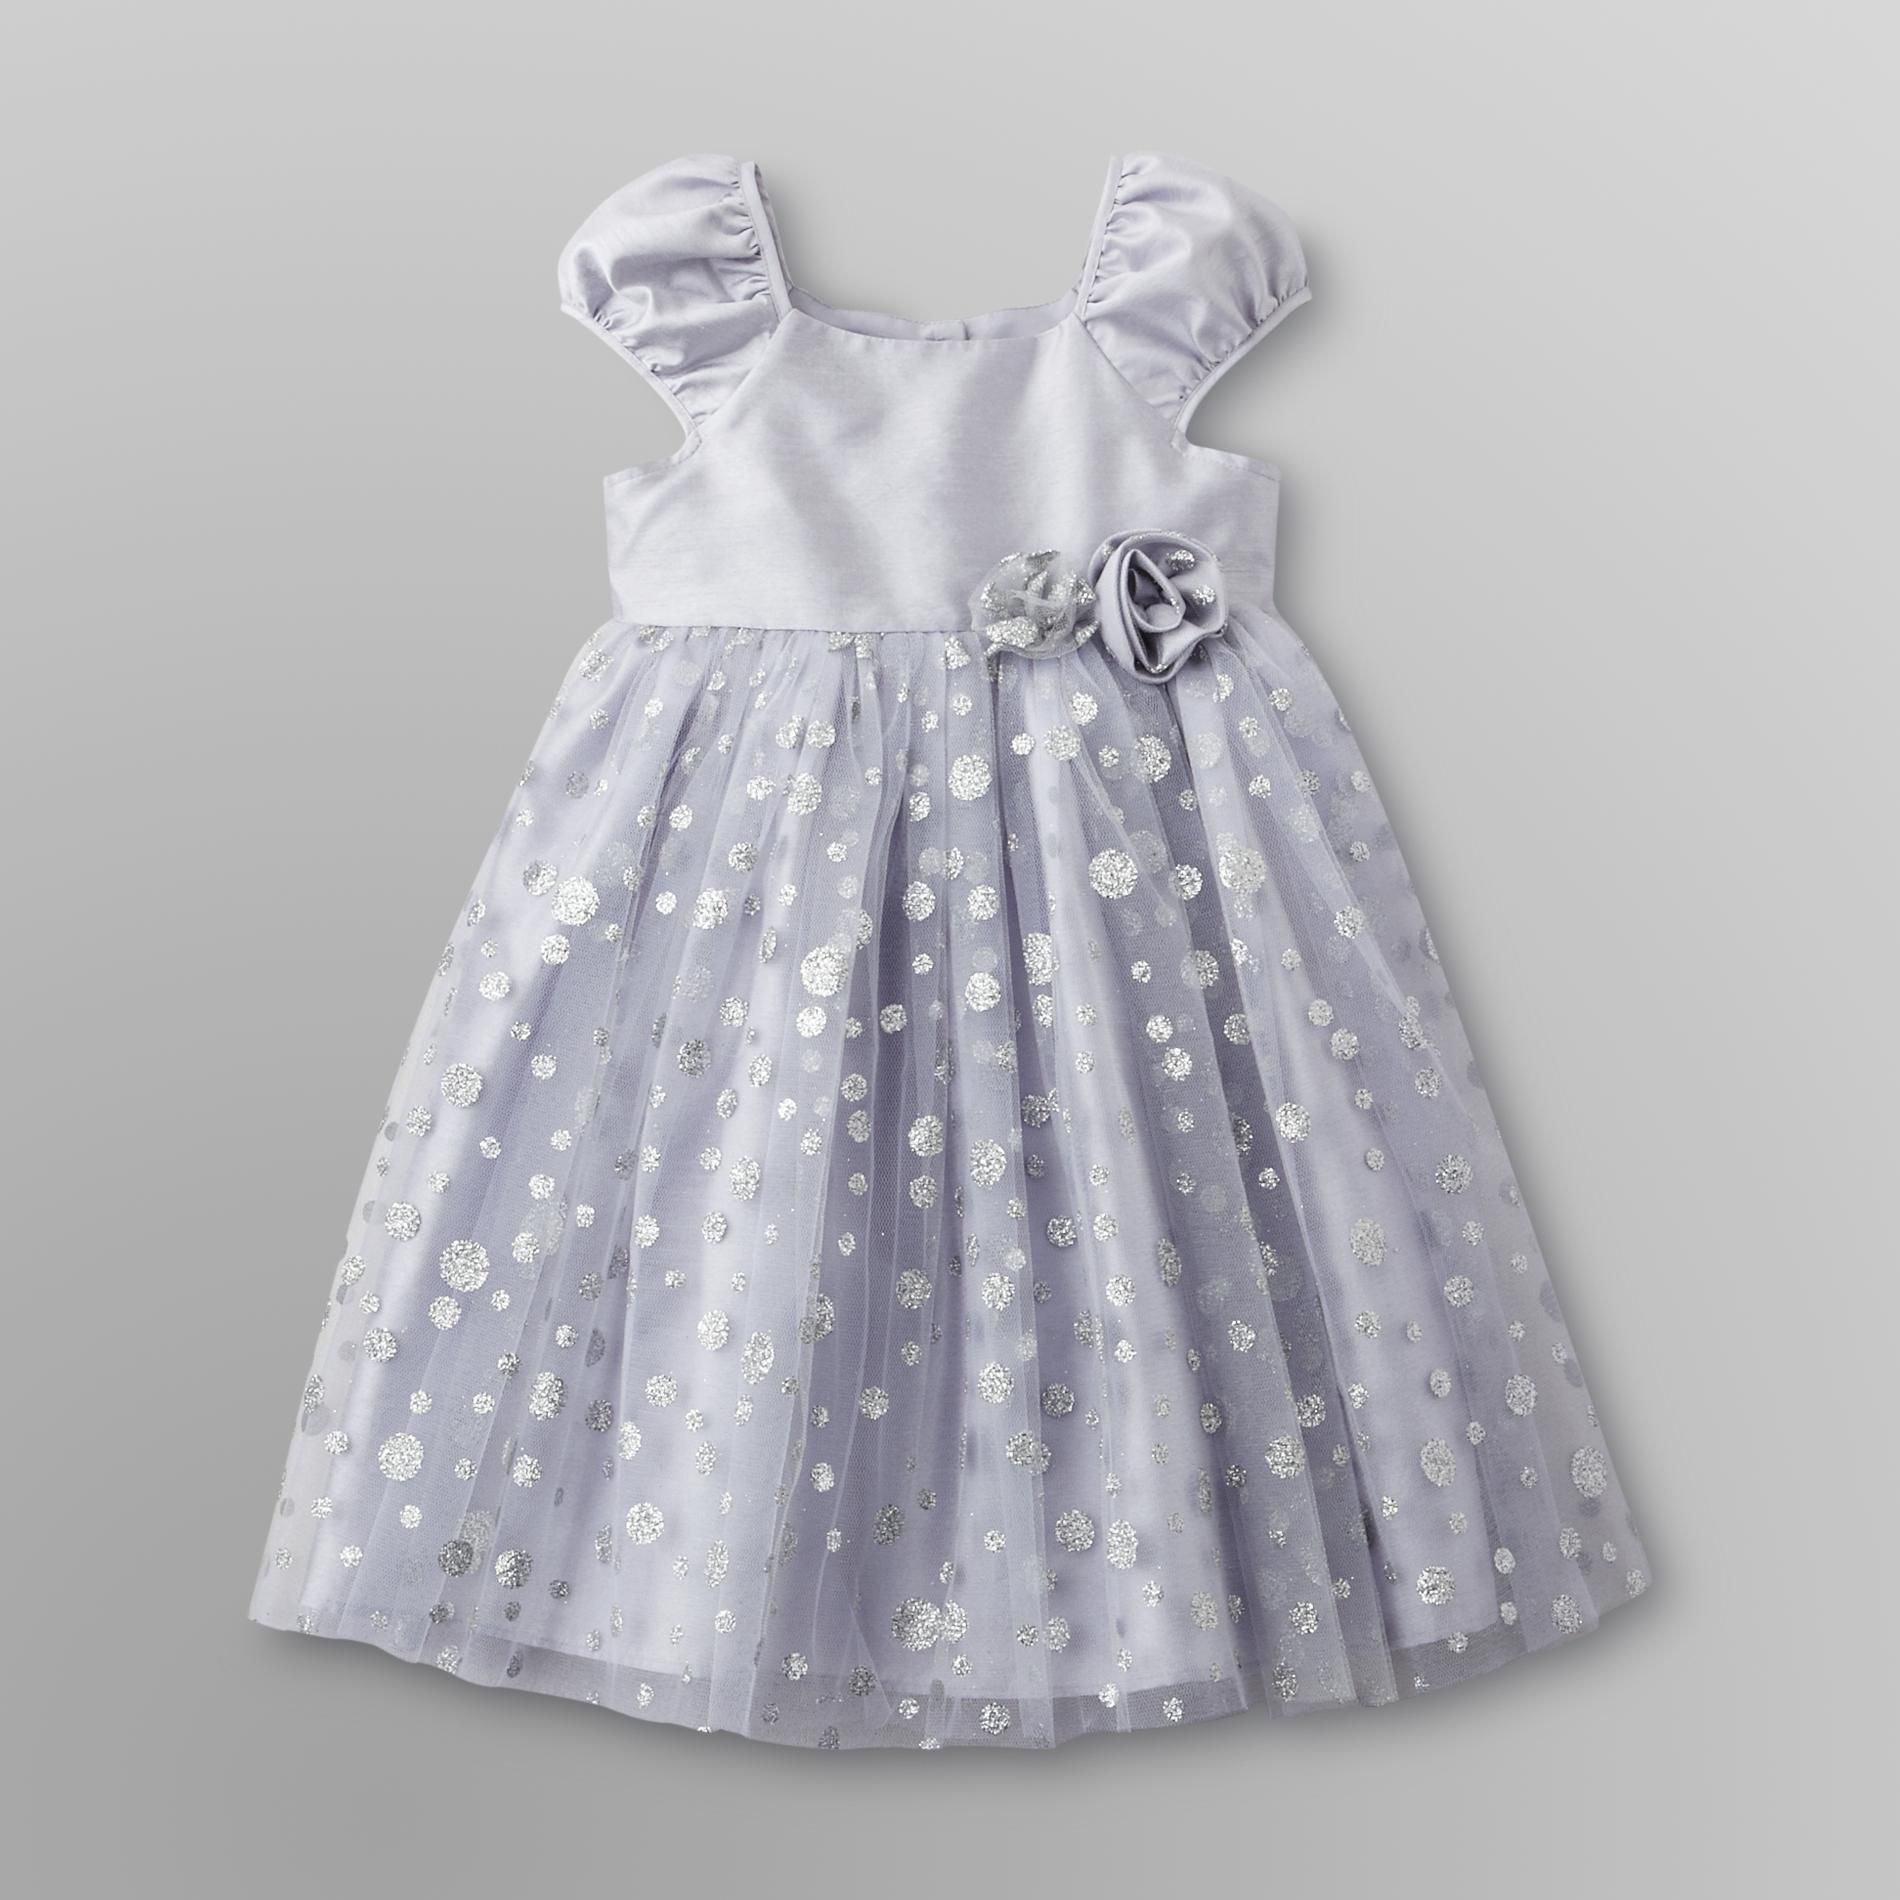 Holiday Editions Infant & Toddler Girl's Formal Dress